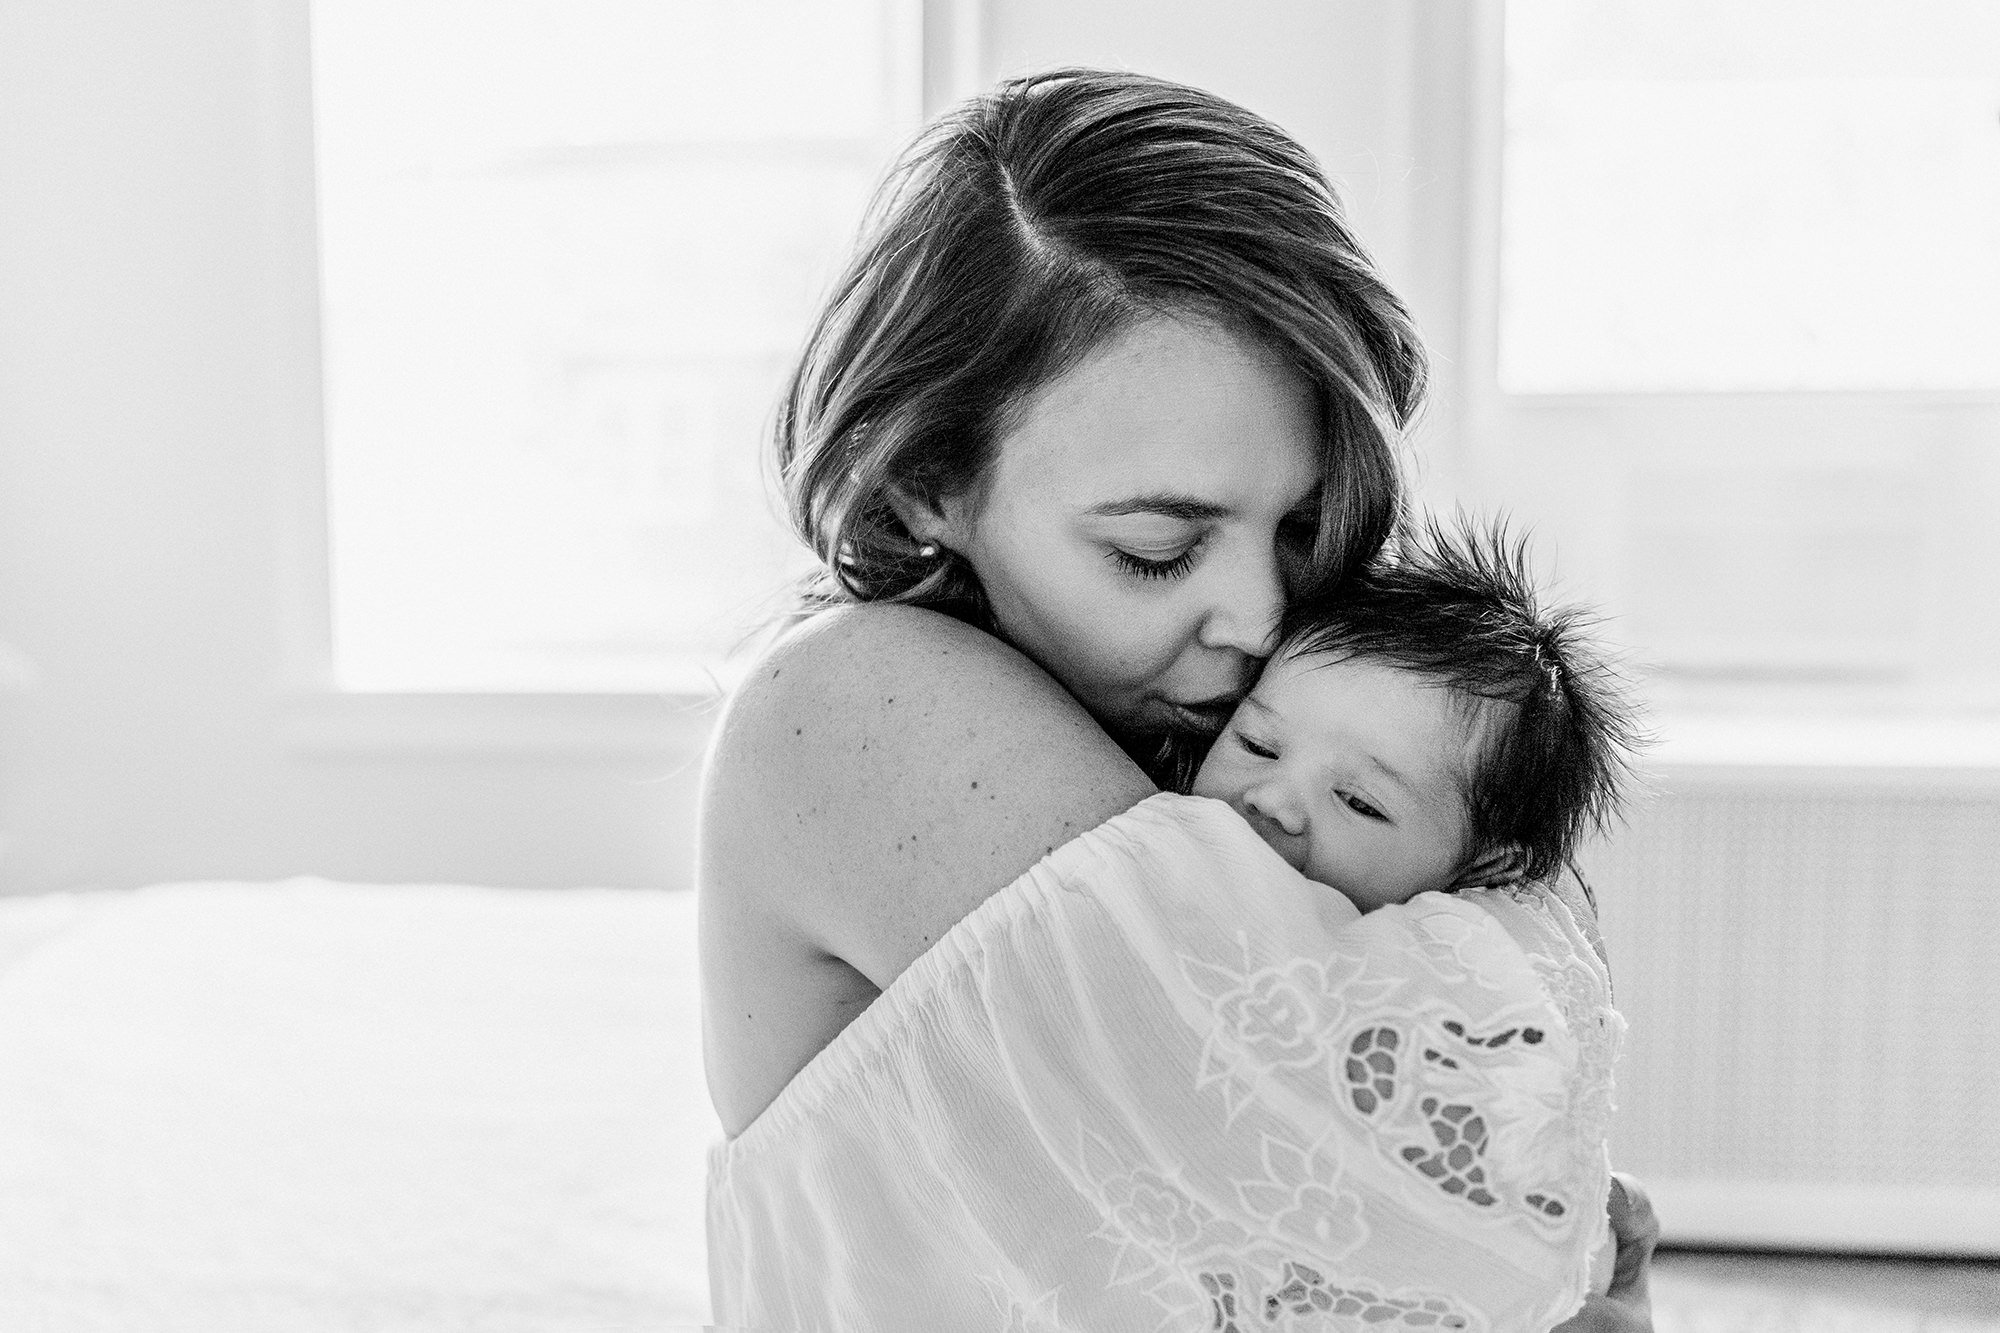 &ldquo;Motherhood is a choice you make every day, to put someone else&rsquo;s happiness and well-being ahead of your own, to teach the hard lessons, to do the right thing even when you&rsquo;re not sure what the right thing is ... and to forgive your